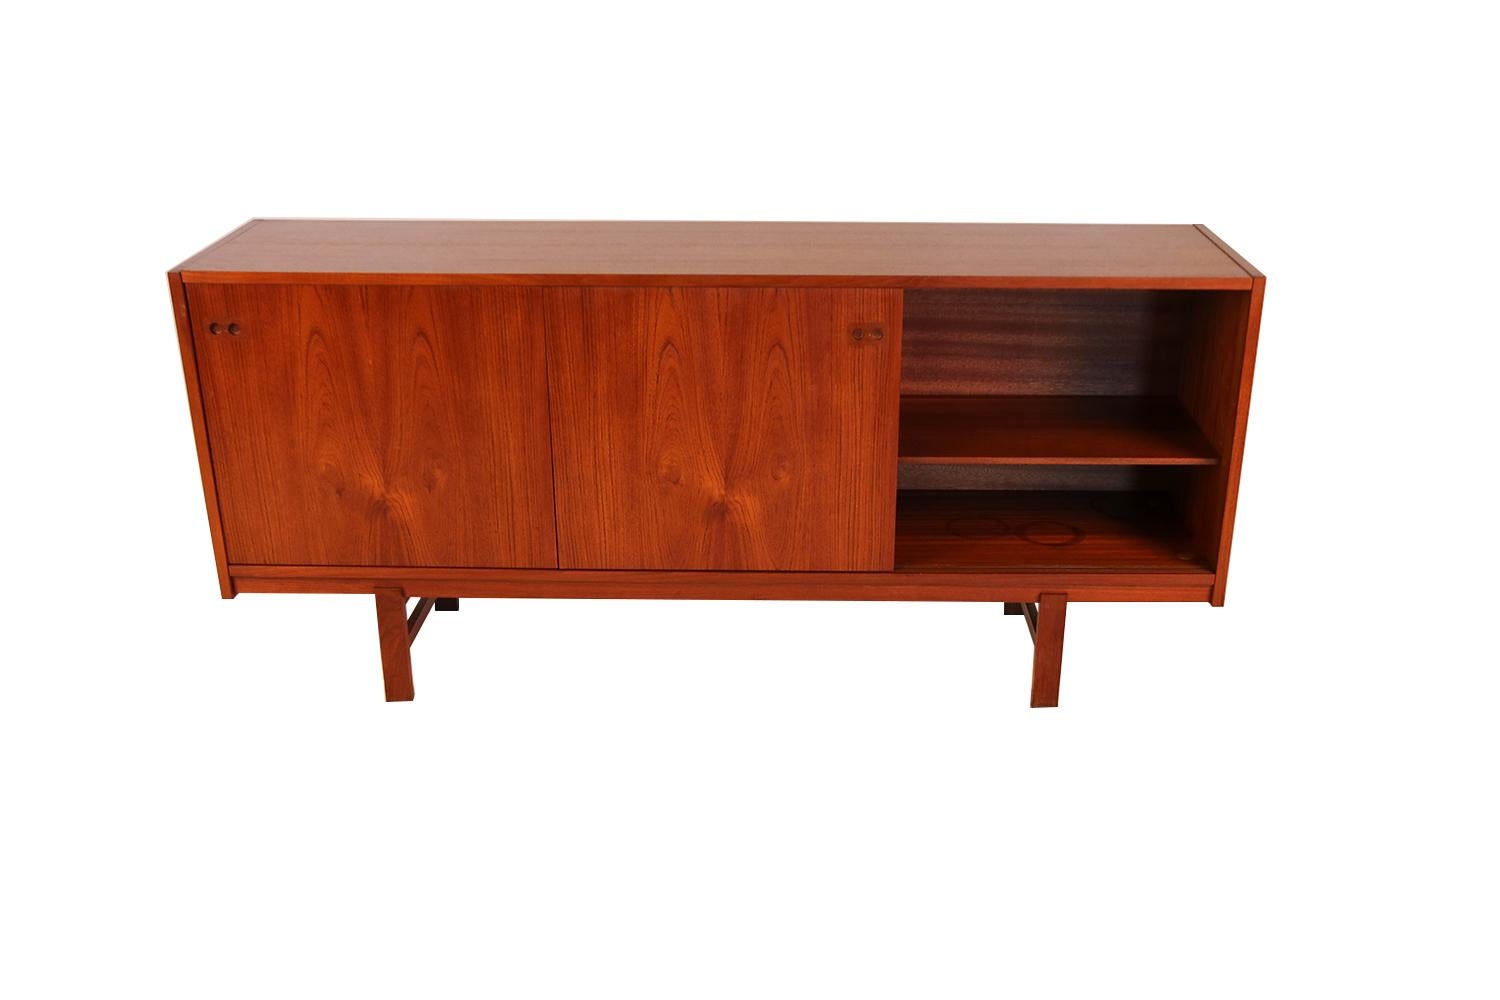 Gorgeous midcentury Danish, beautifully grained, teak, sliding door credenza/sideboard made in Denmark. Each cabinet features a sliding door with inset sculpted circular pulls, opening to reveal a central cabinet with three felt lined, dovetailed